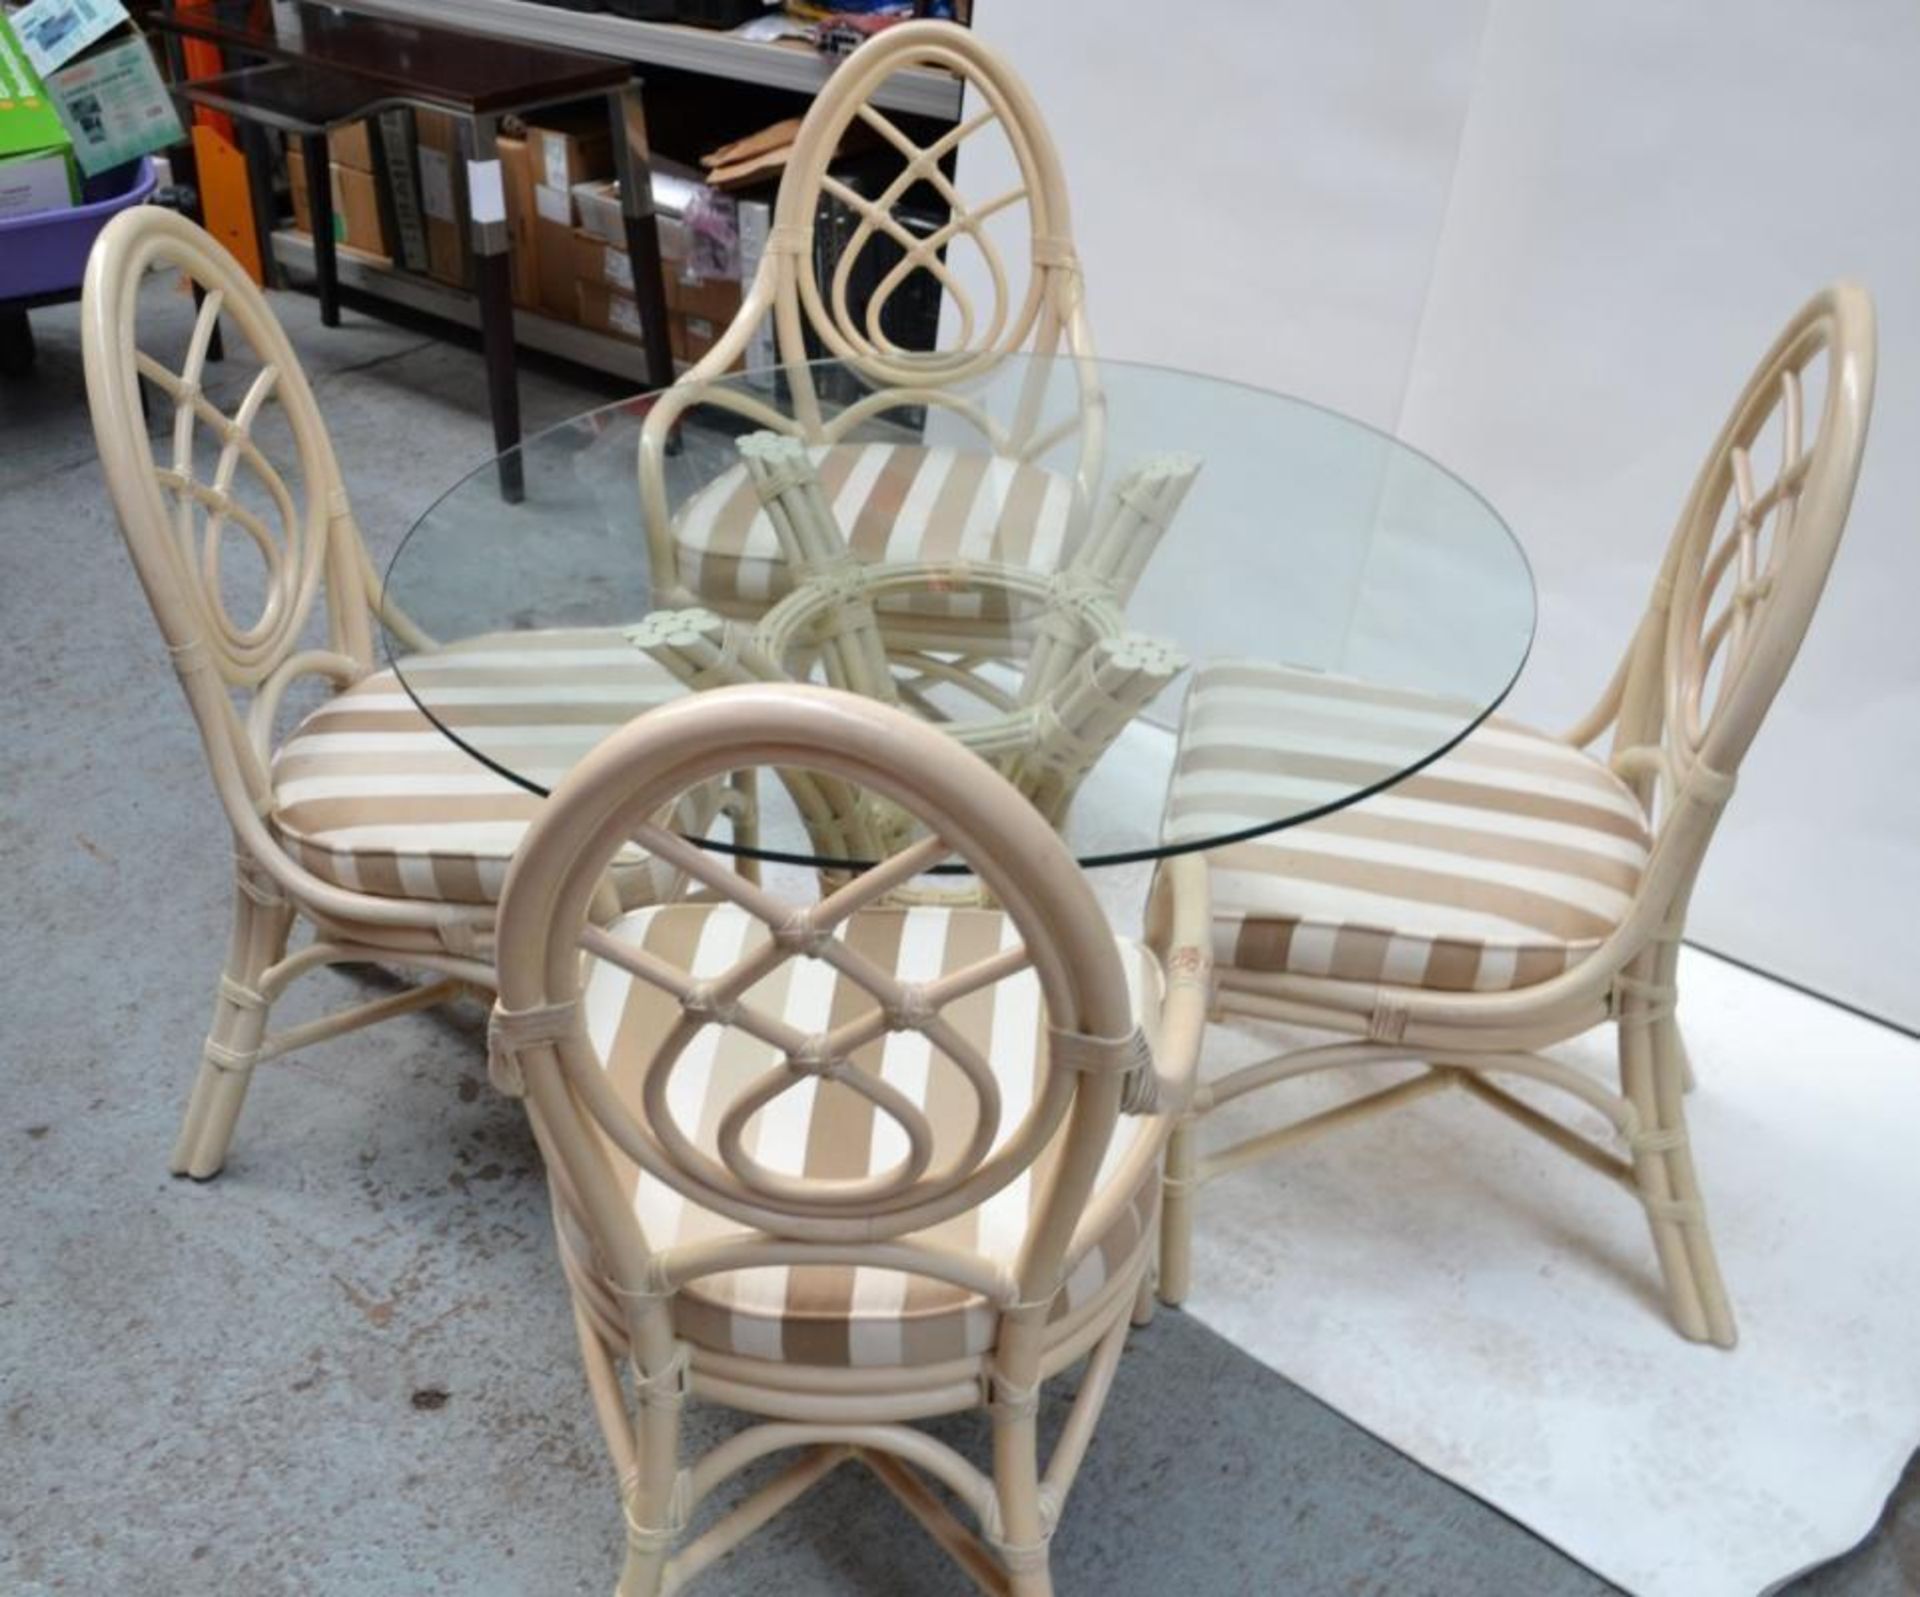 1 x Glass Topped Cane Table with 4 Chairs - Pre-owned In Good Condition - AE010 - CL007 - - Image 2 of 13